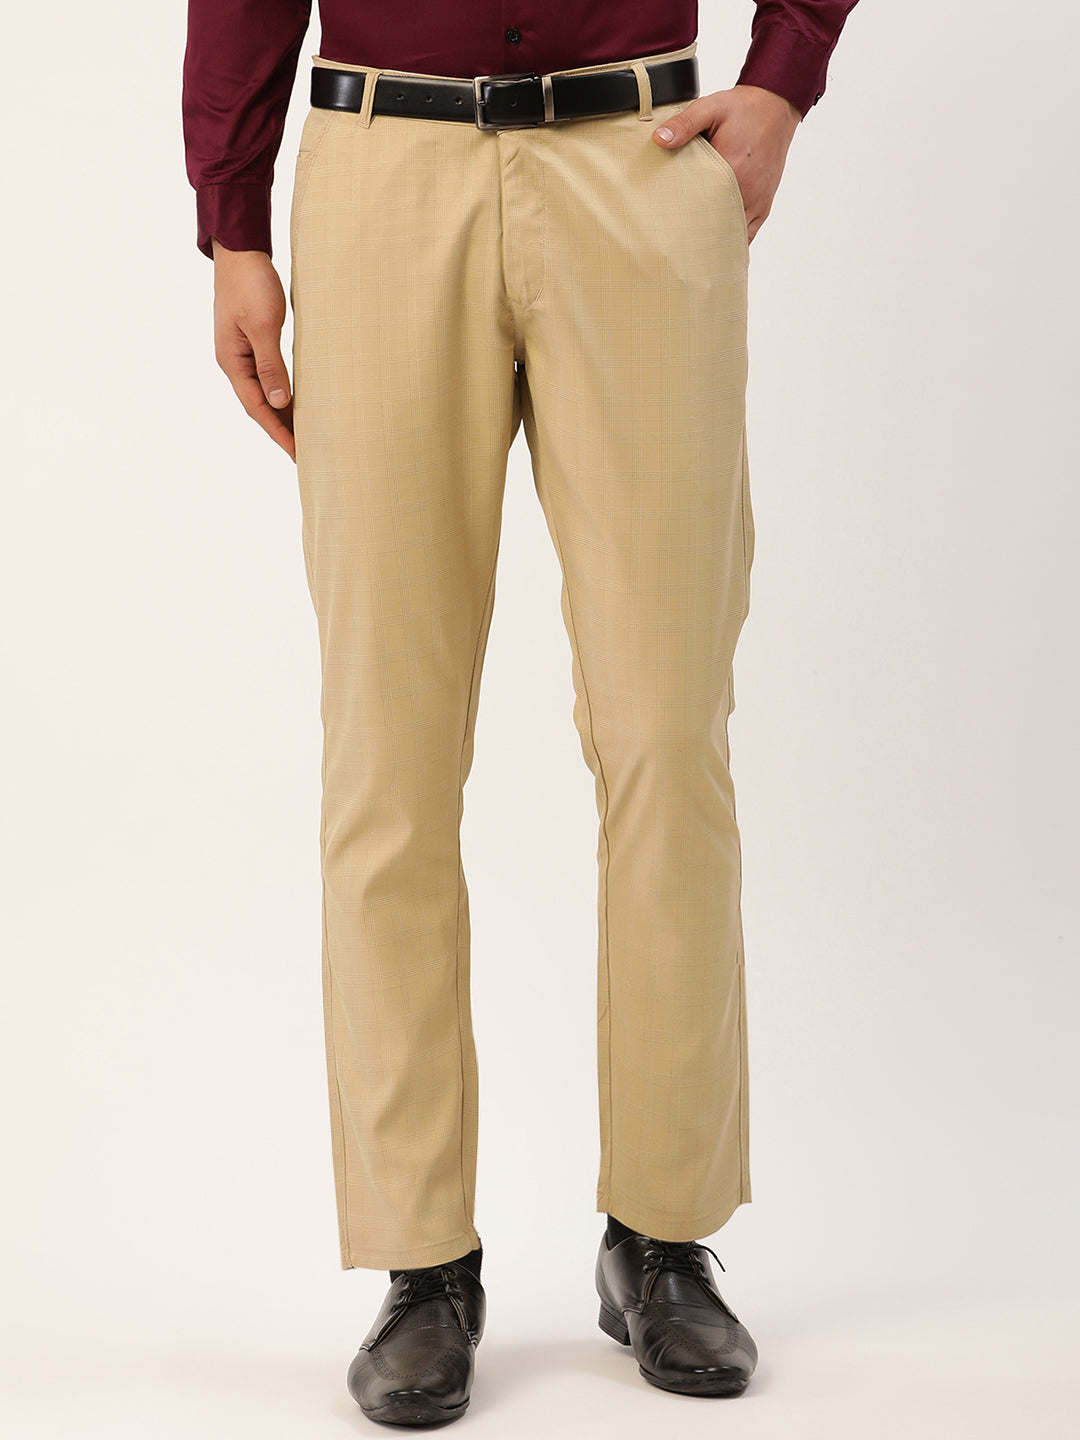 Men's Brown Cotton Checked Formal Trousers at Rs 992.00 | Men Trousers |  ID: 2851929713088